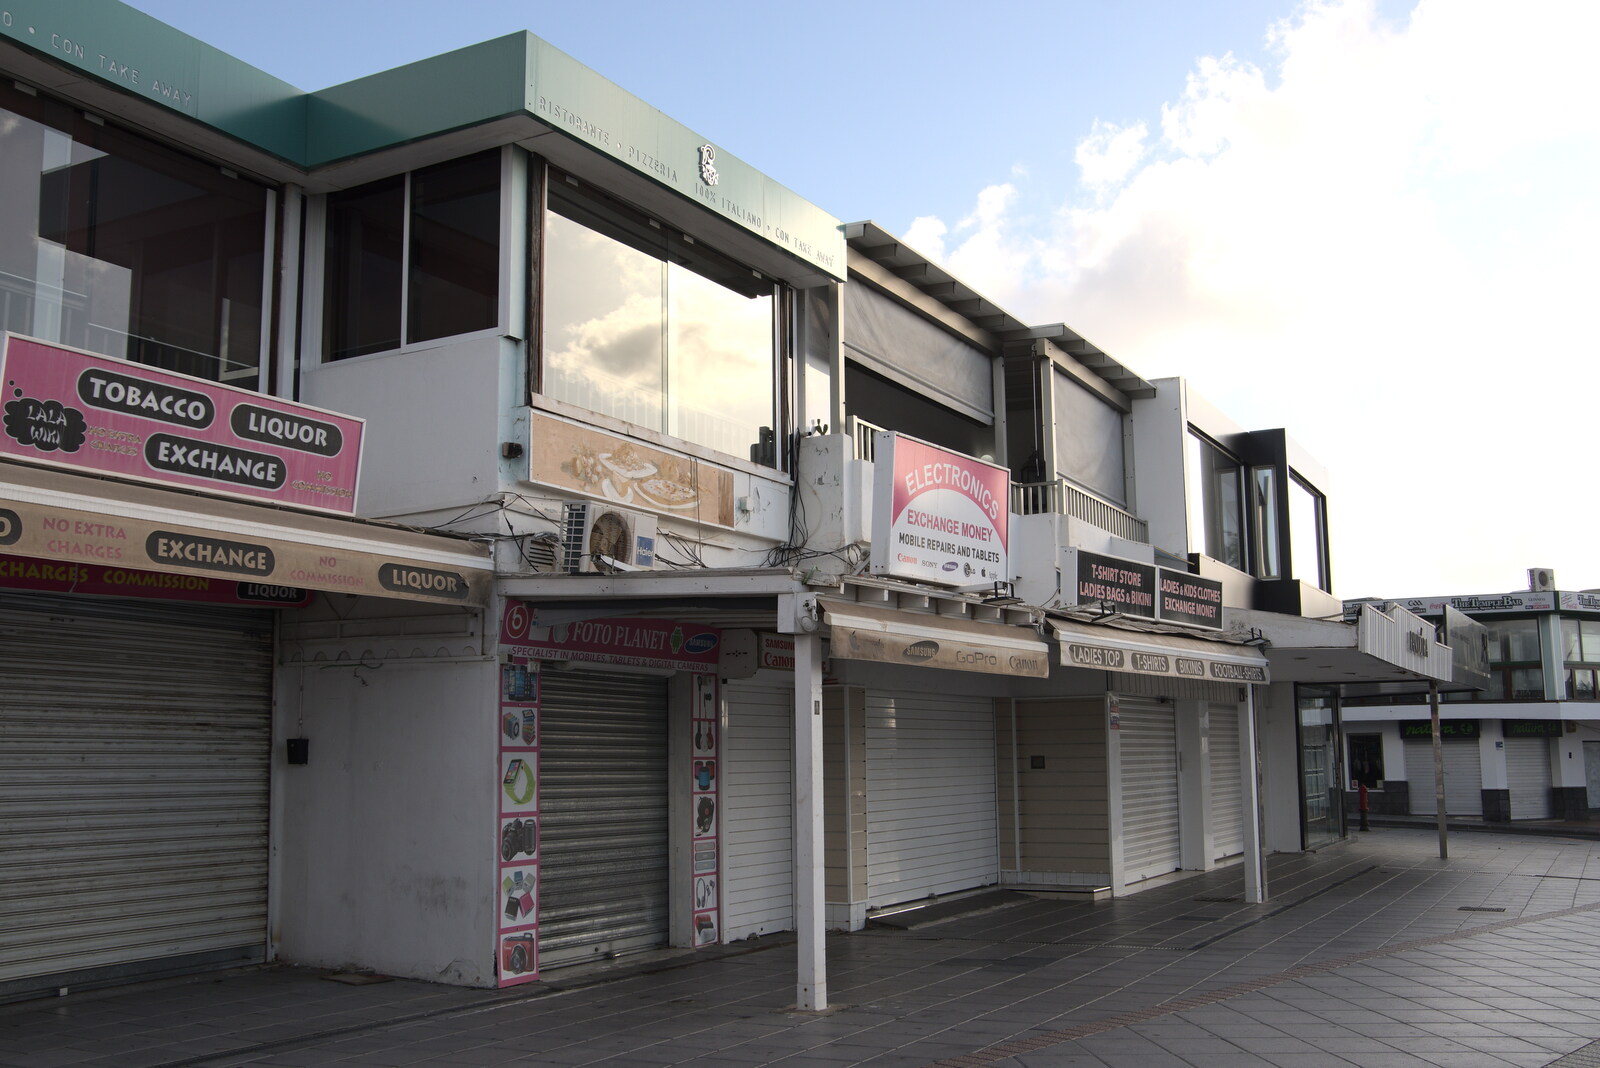 Derelict shop units from Five Days in Lanzarote, Canary Islands, Spain - 24th October 2021